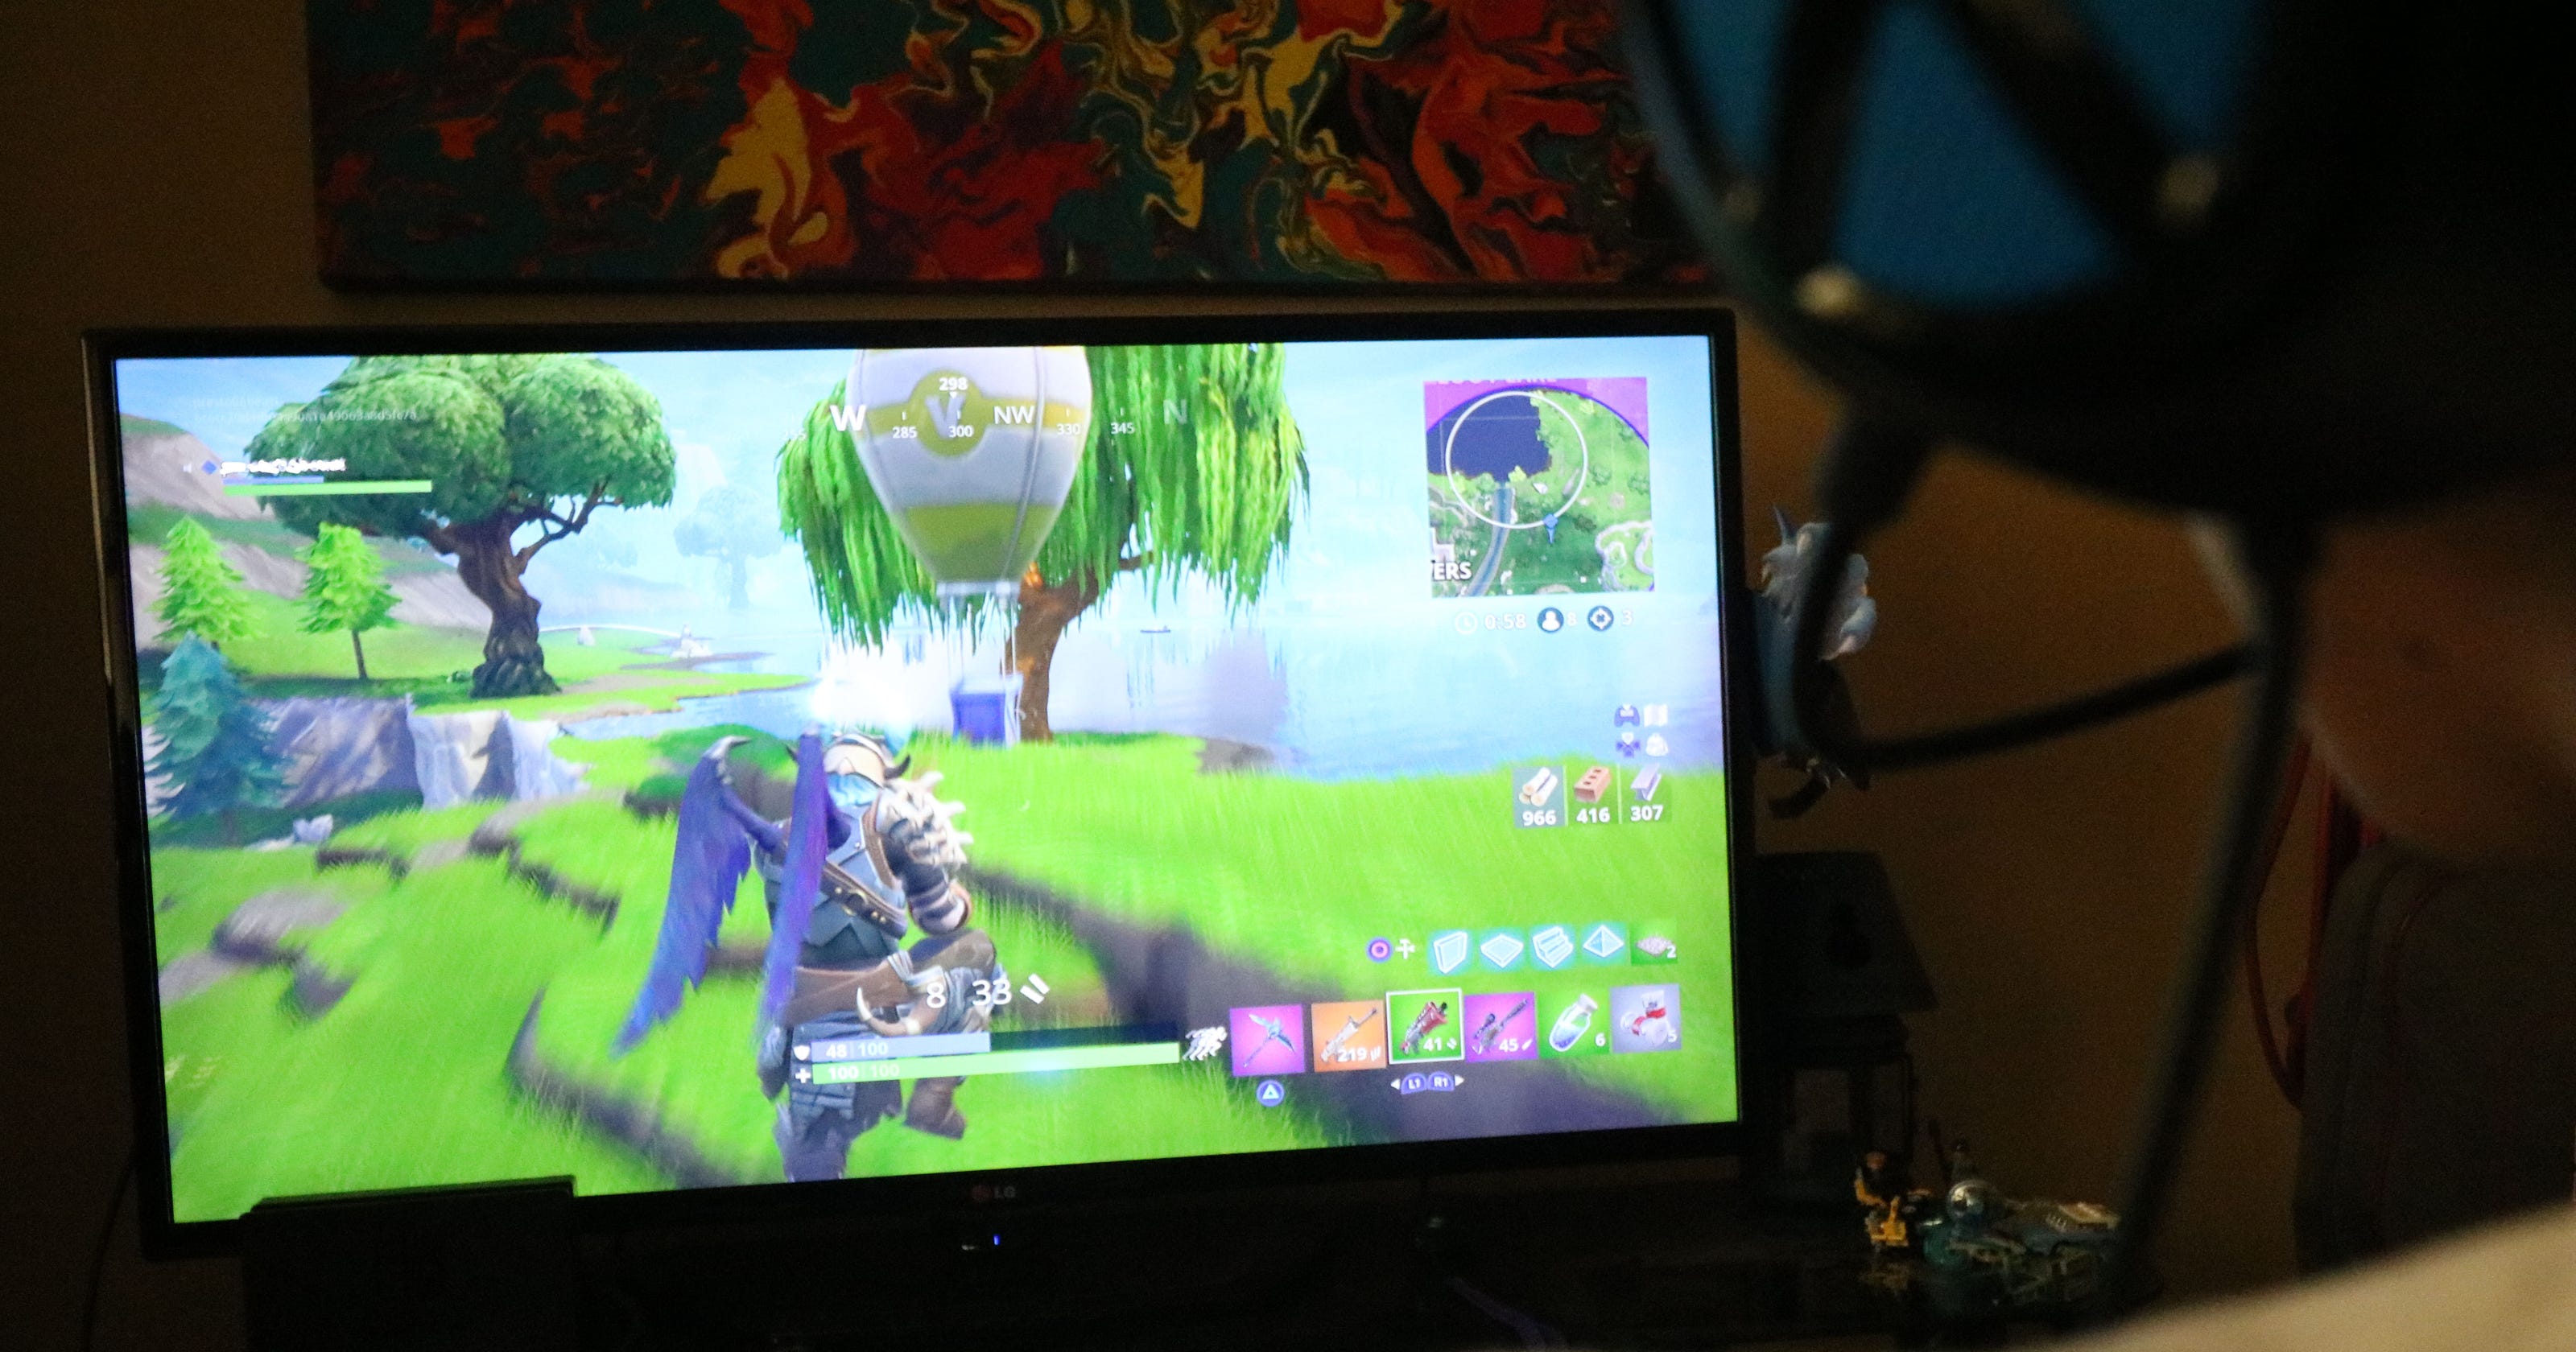 hang up the game controller how to press pause on fortnite as the school year begins - how to check fortnite playtime